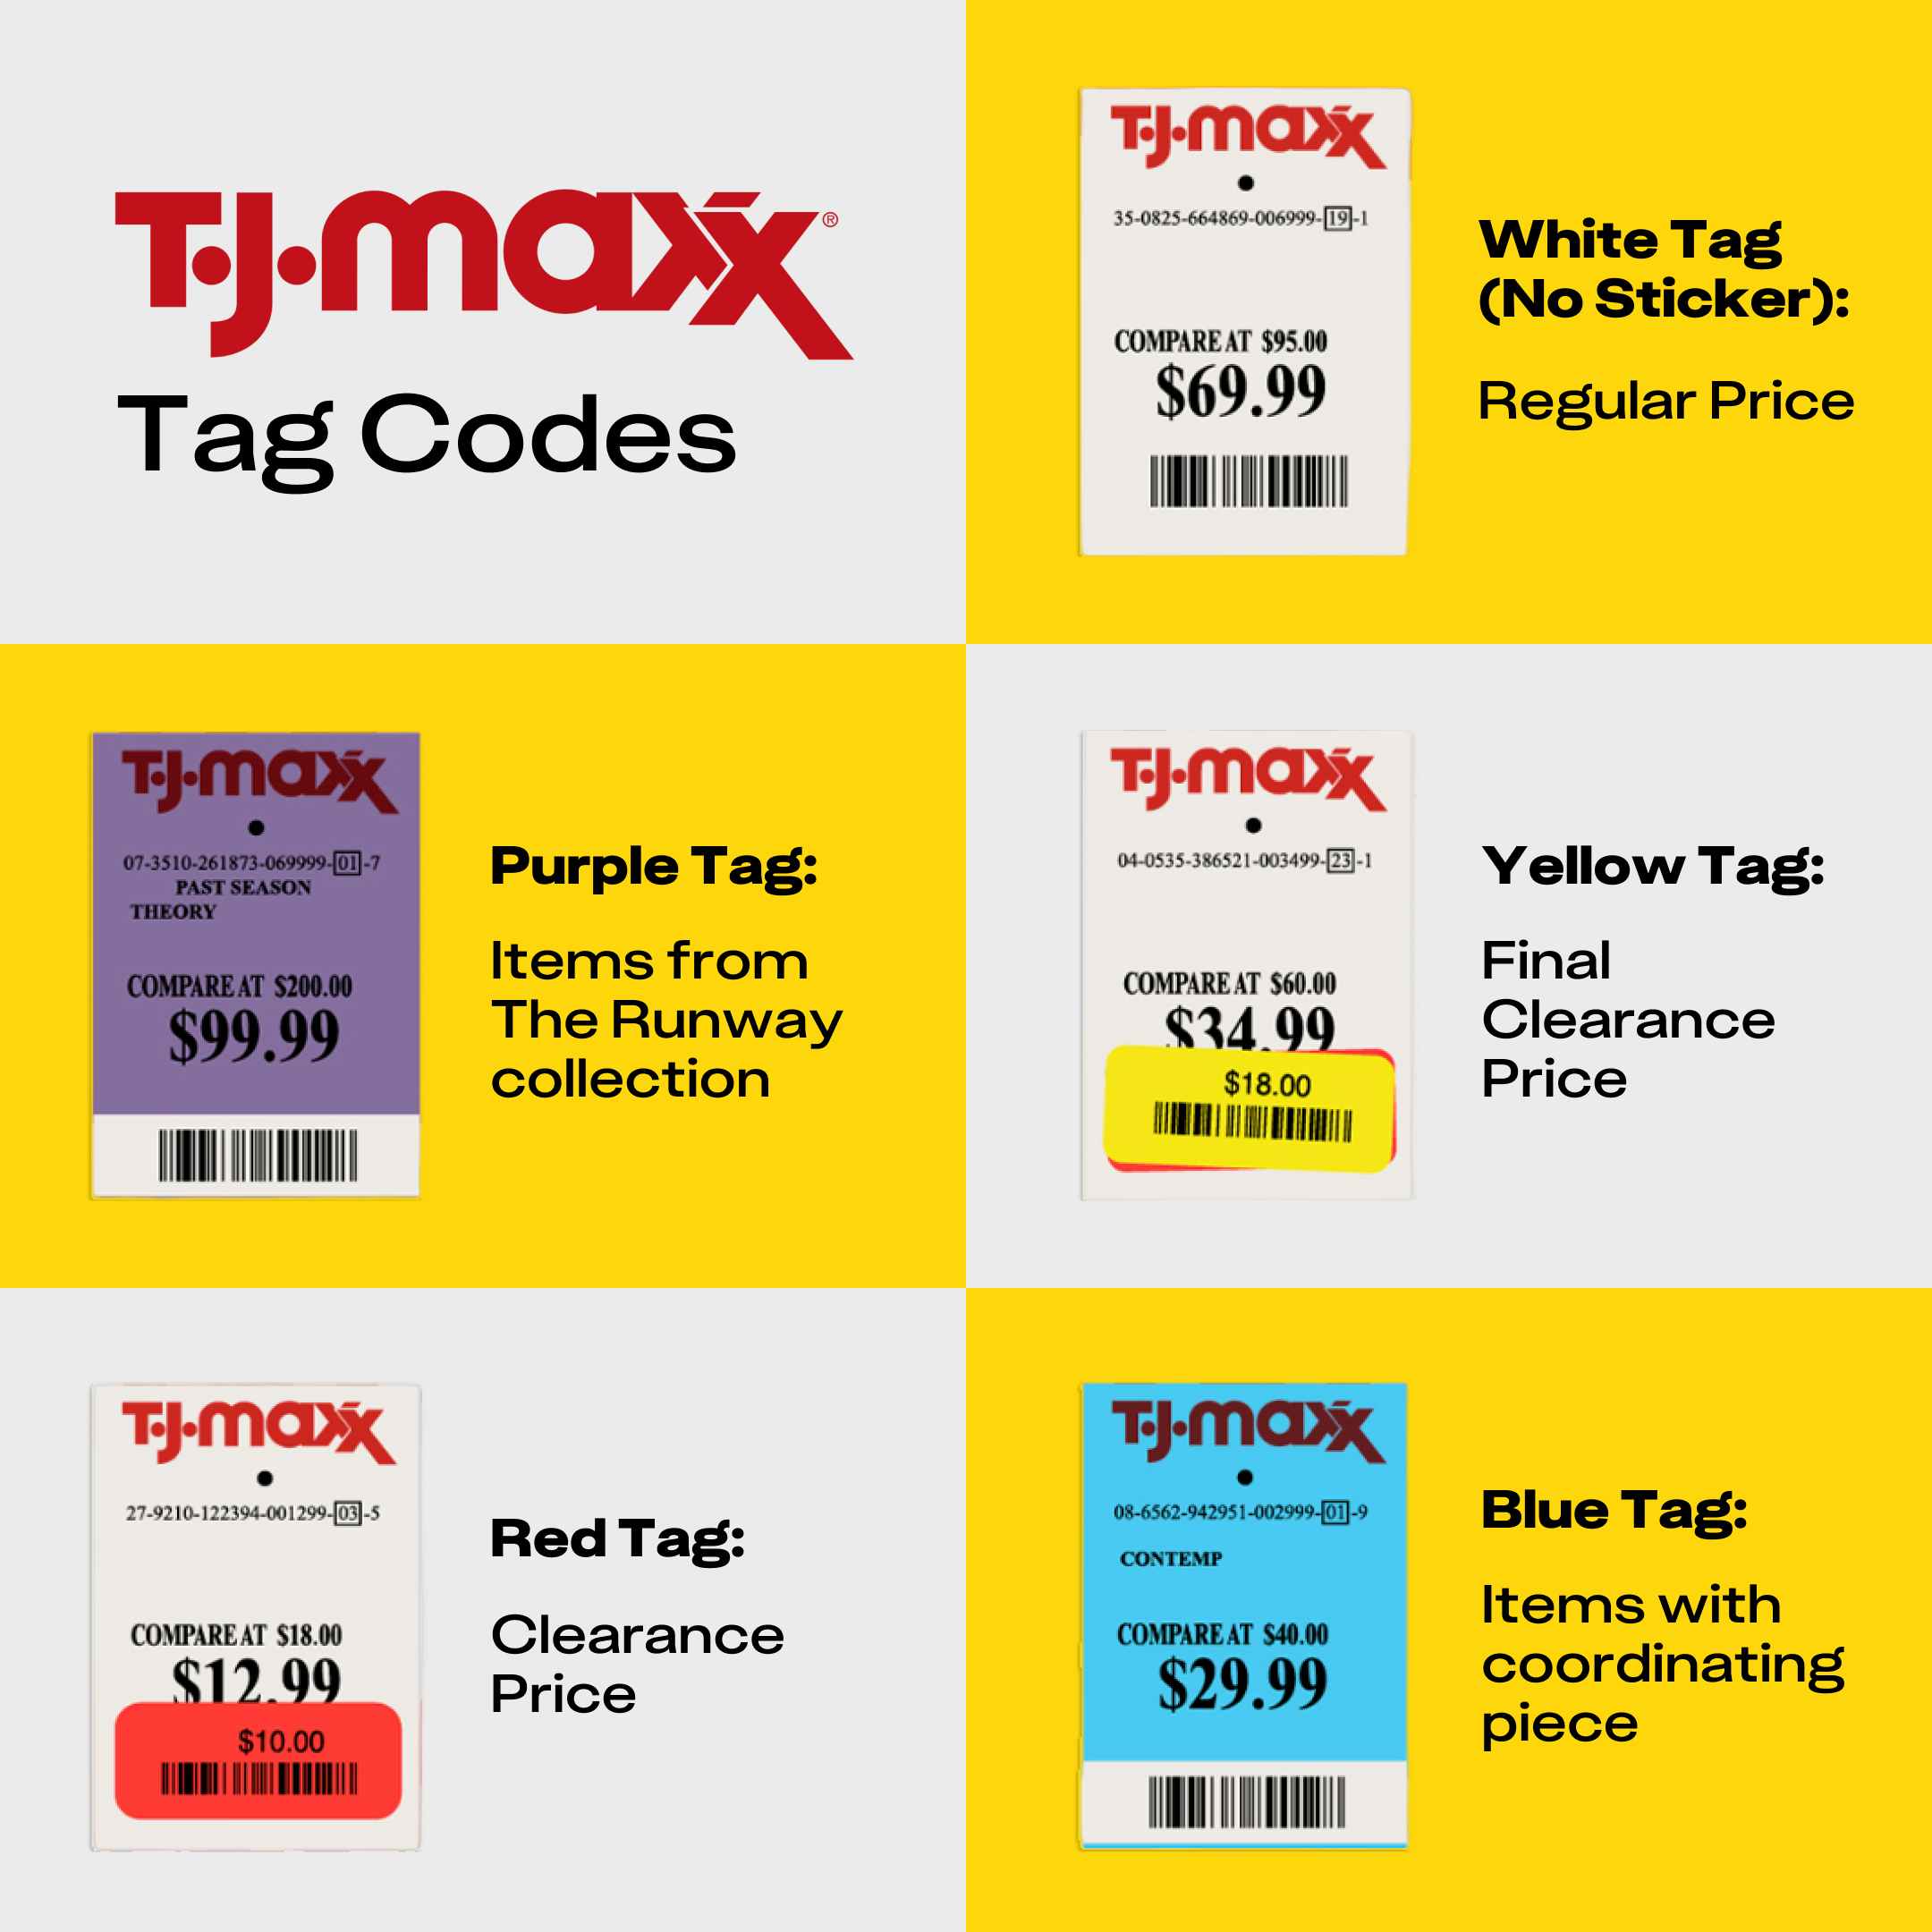 https://prod-cdn-thekrazycouponlady.imgix.net/wp-content/uploads/2017/11/tjmaxx-price-taga-decoder-legend-guide-kcl-1704231162-1704231162.png?auto=format&fit=fill&q=25